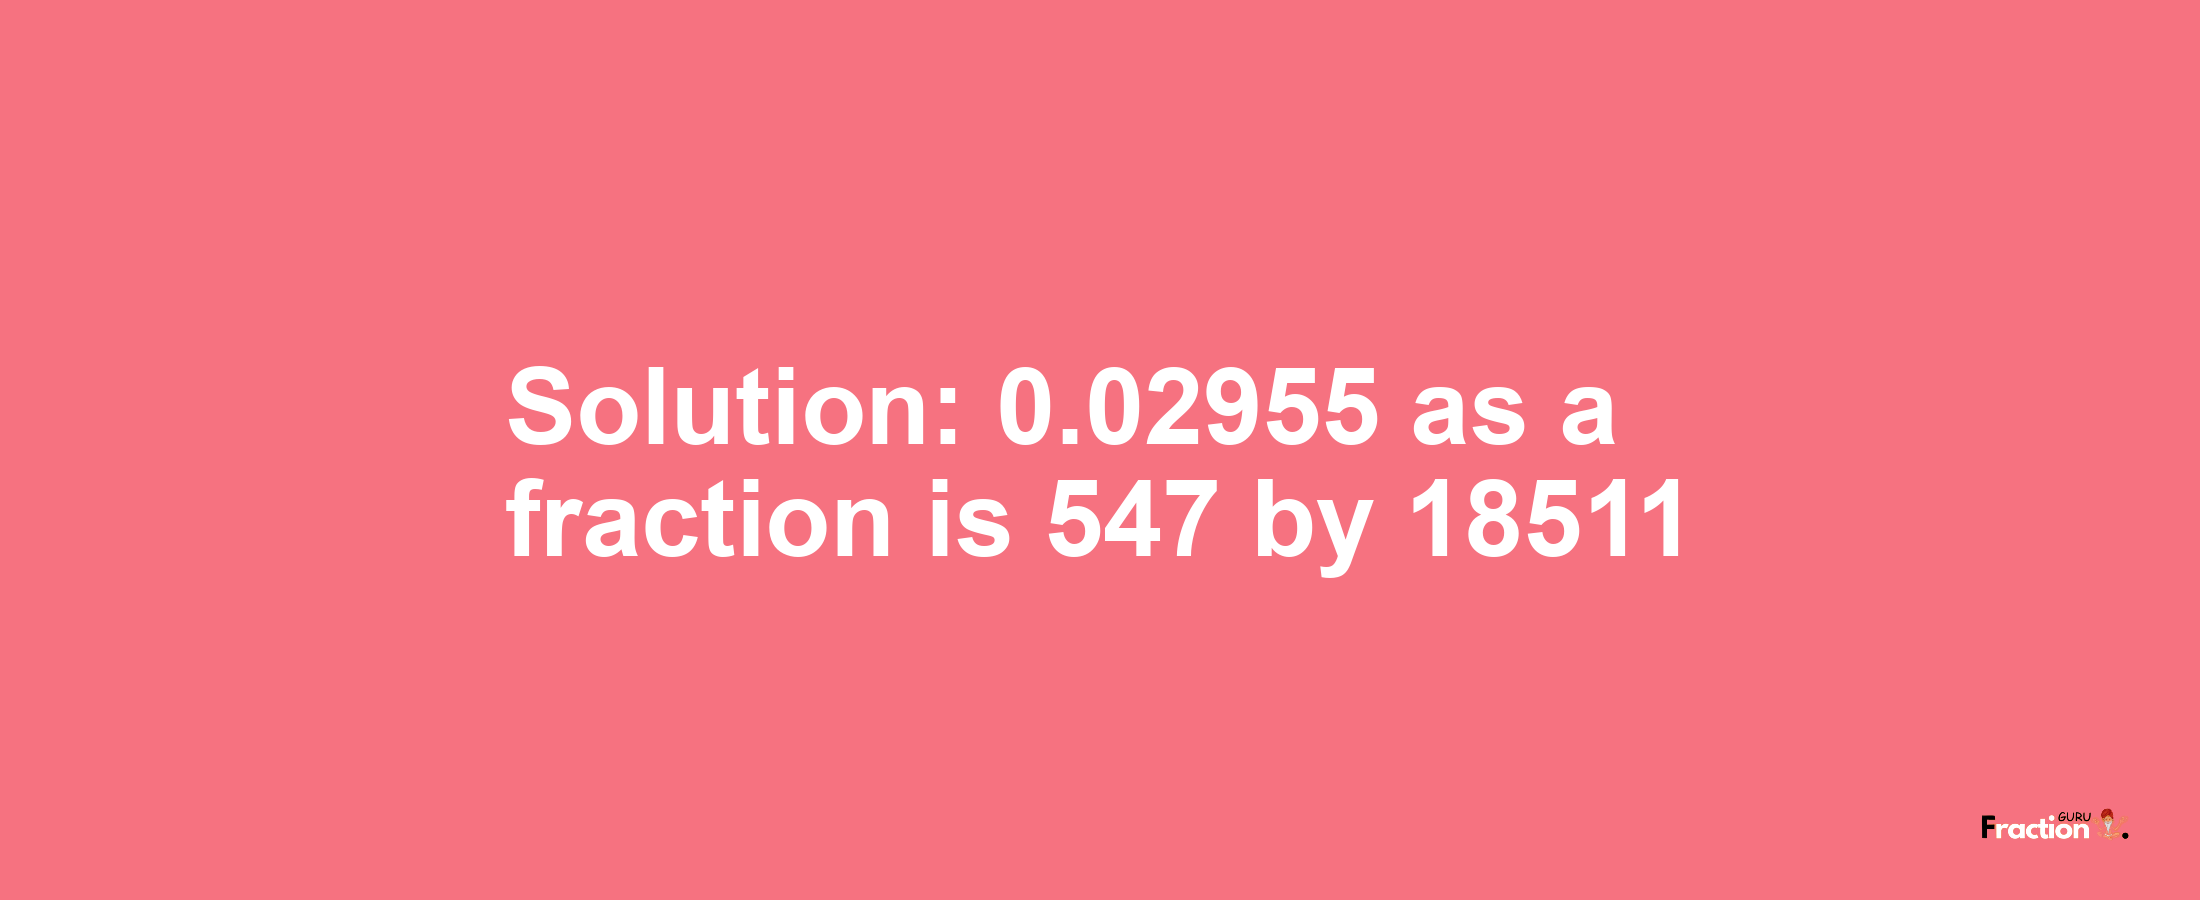 Solution:0.02955 as a fraction is 547/18511